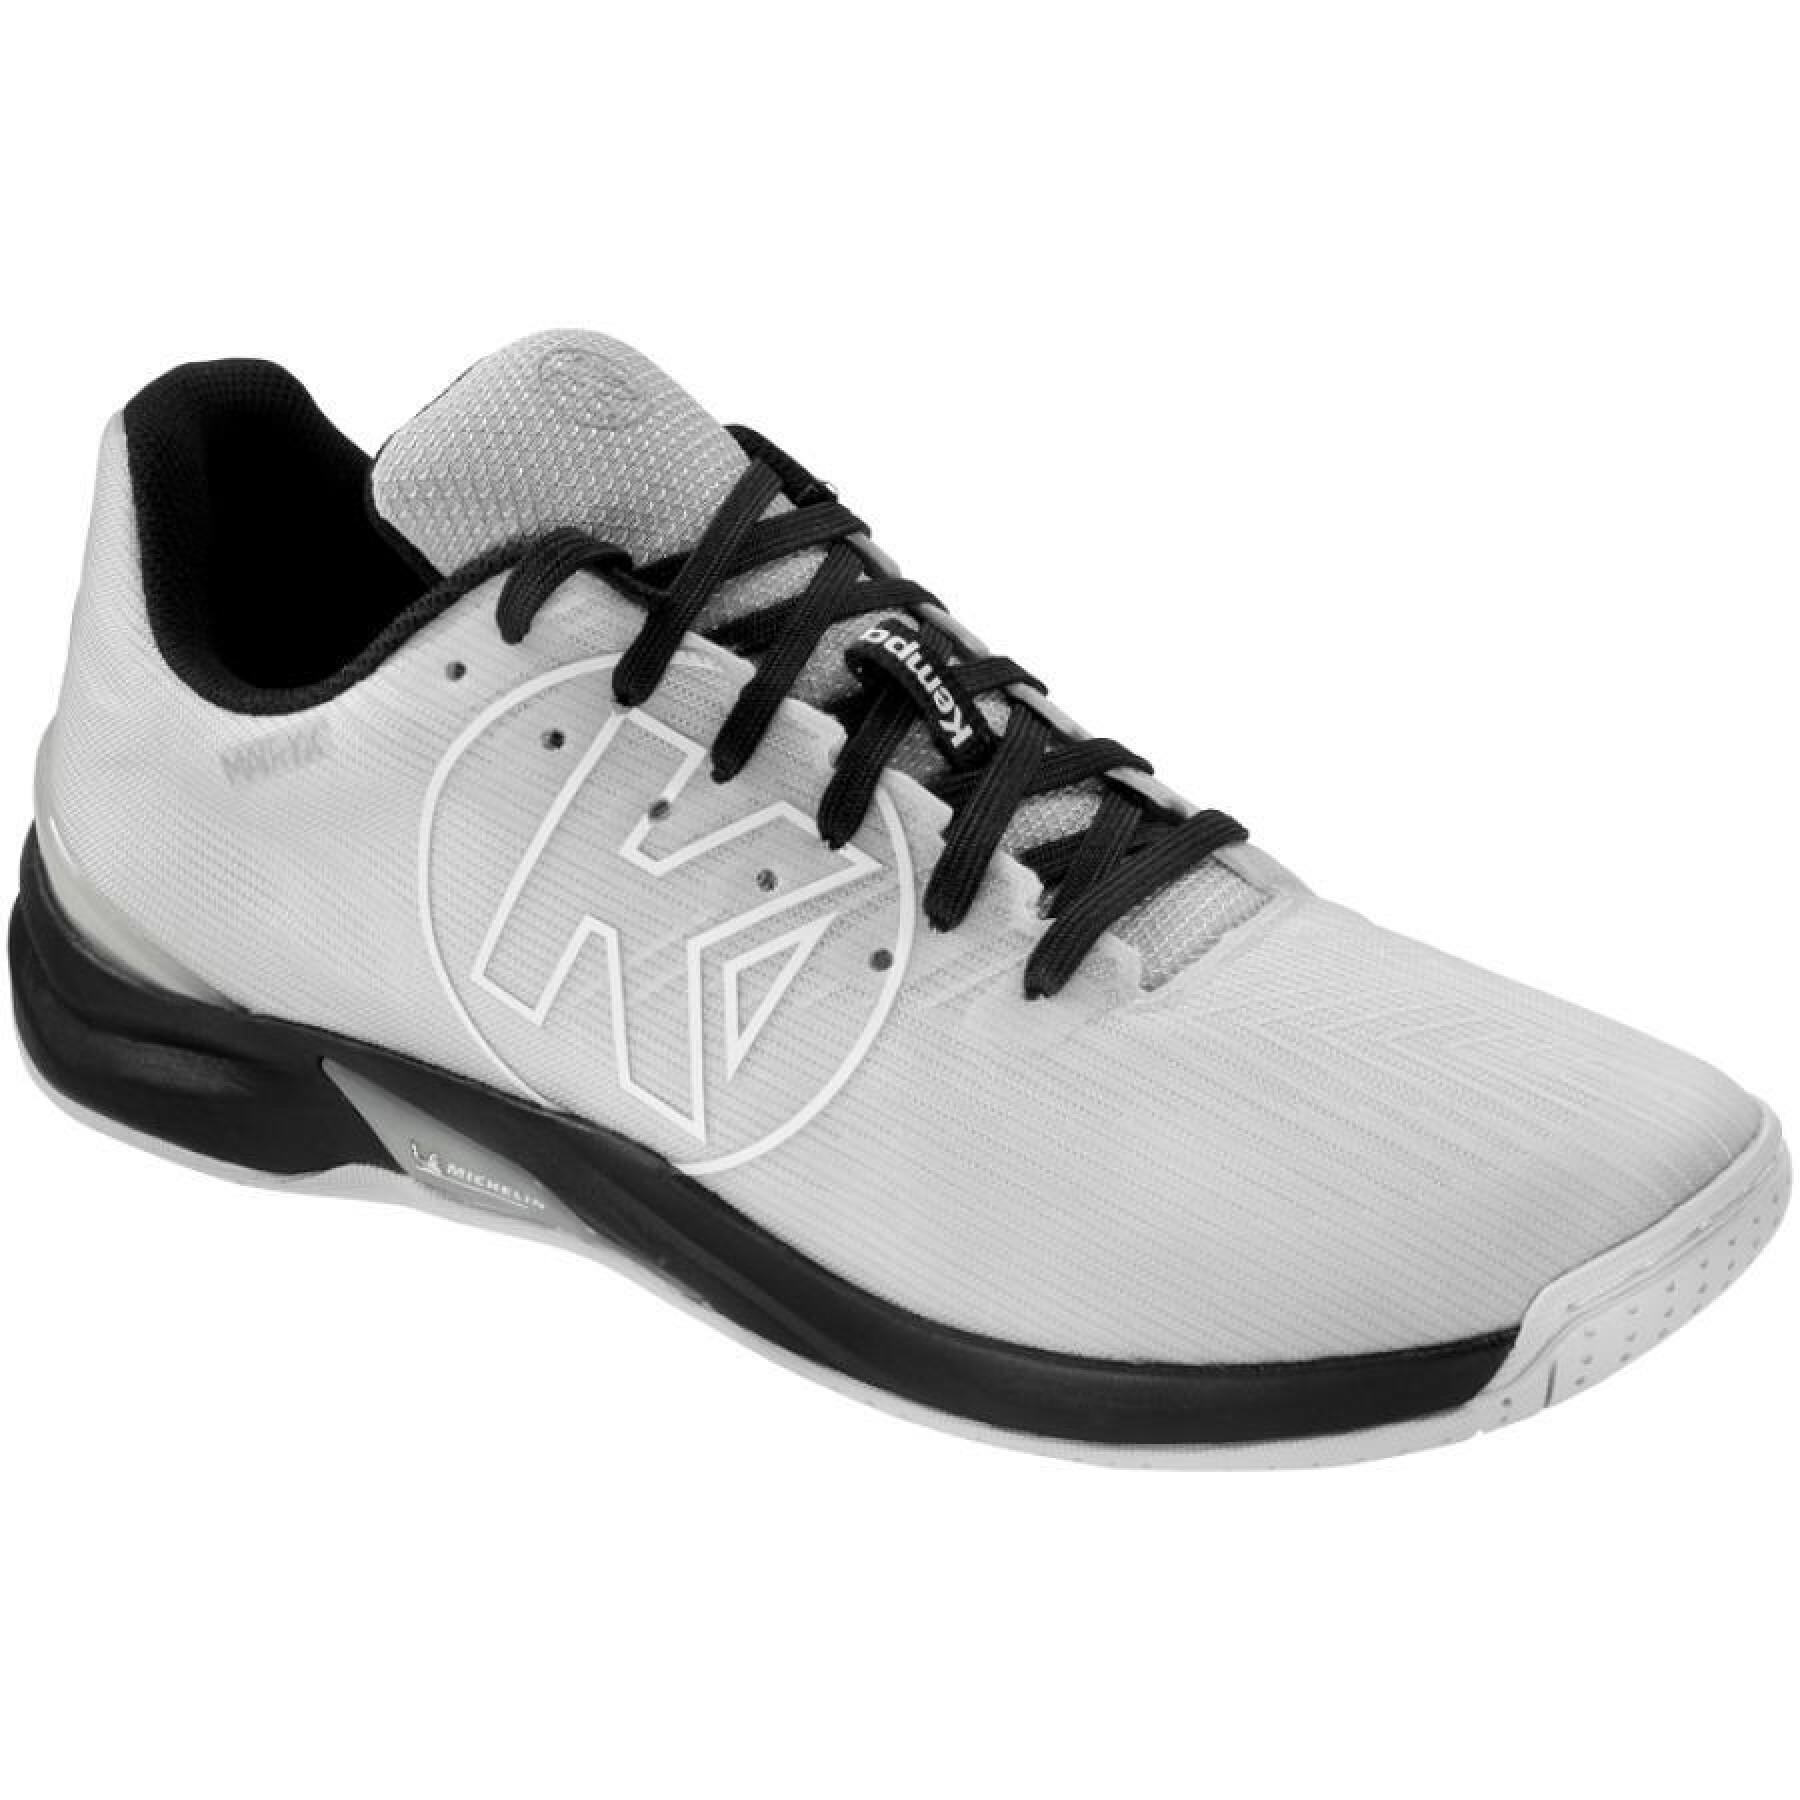 Shoes indoor Kempa Attack One 2.1